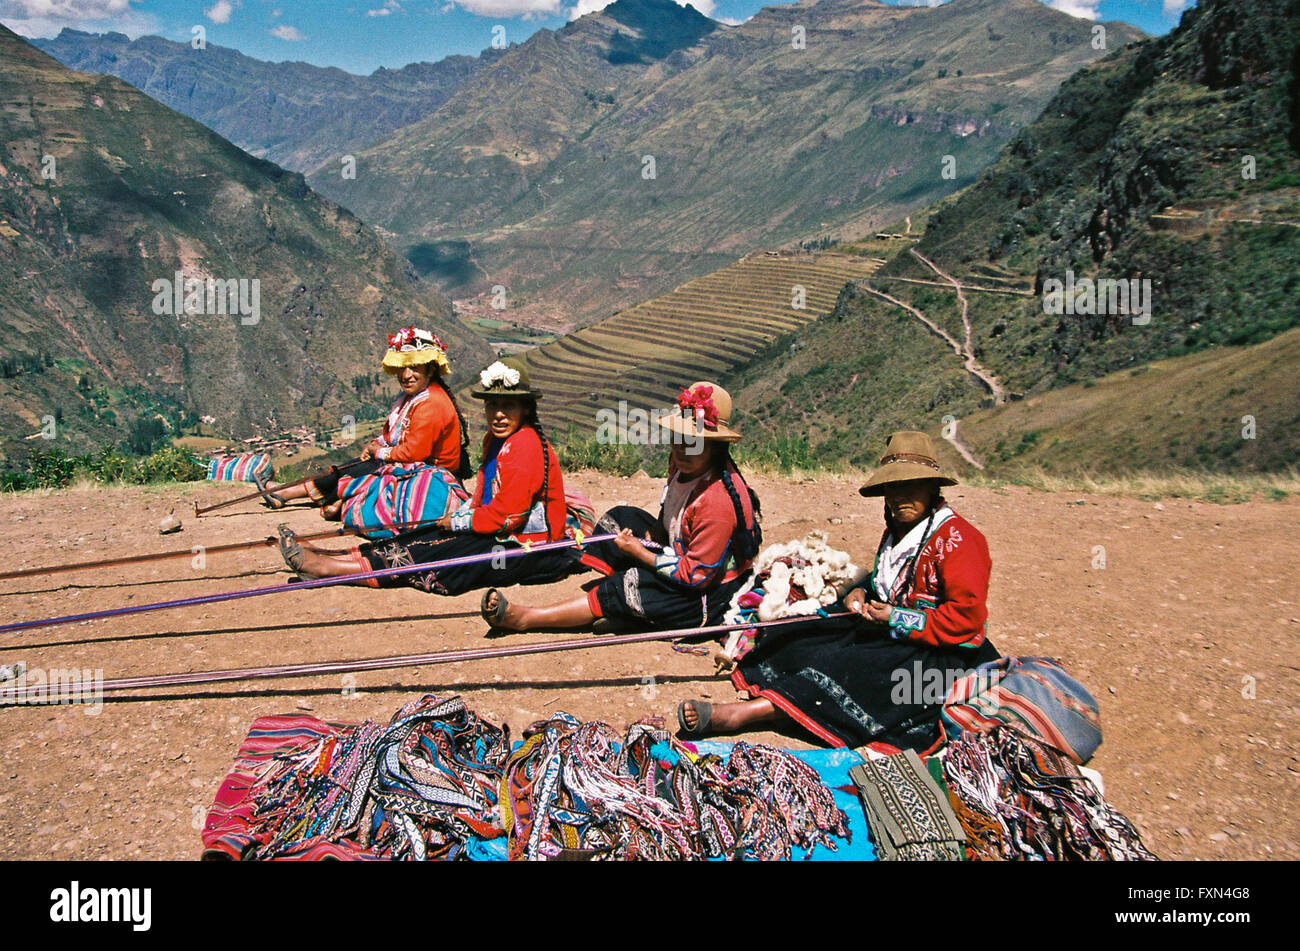 Quechua Indian women weaving with strap loom Stock Photo